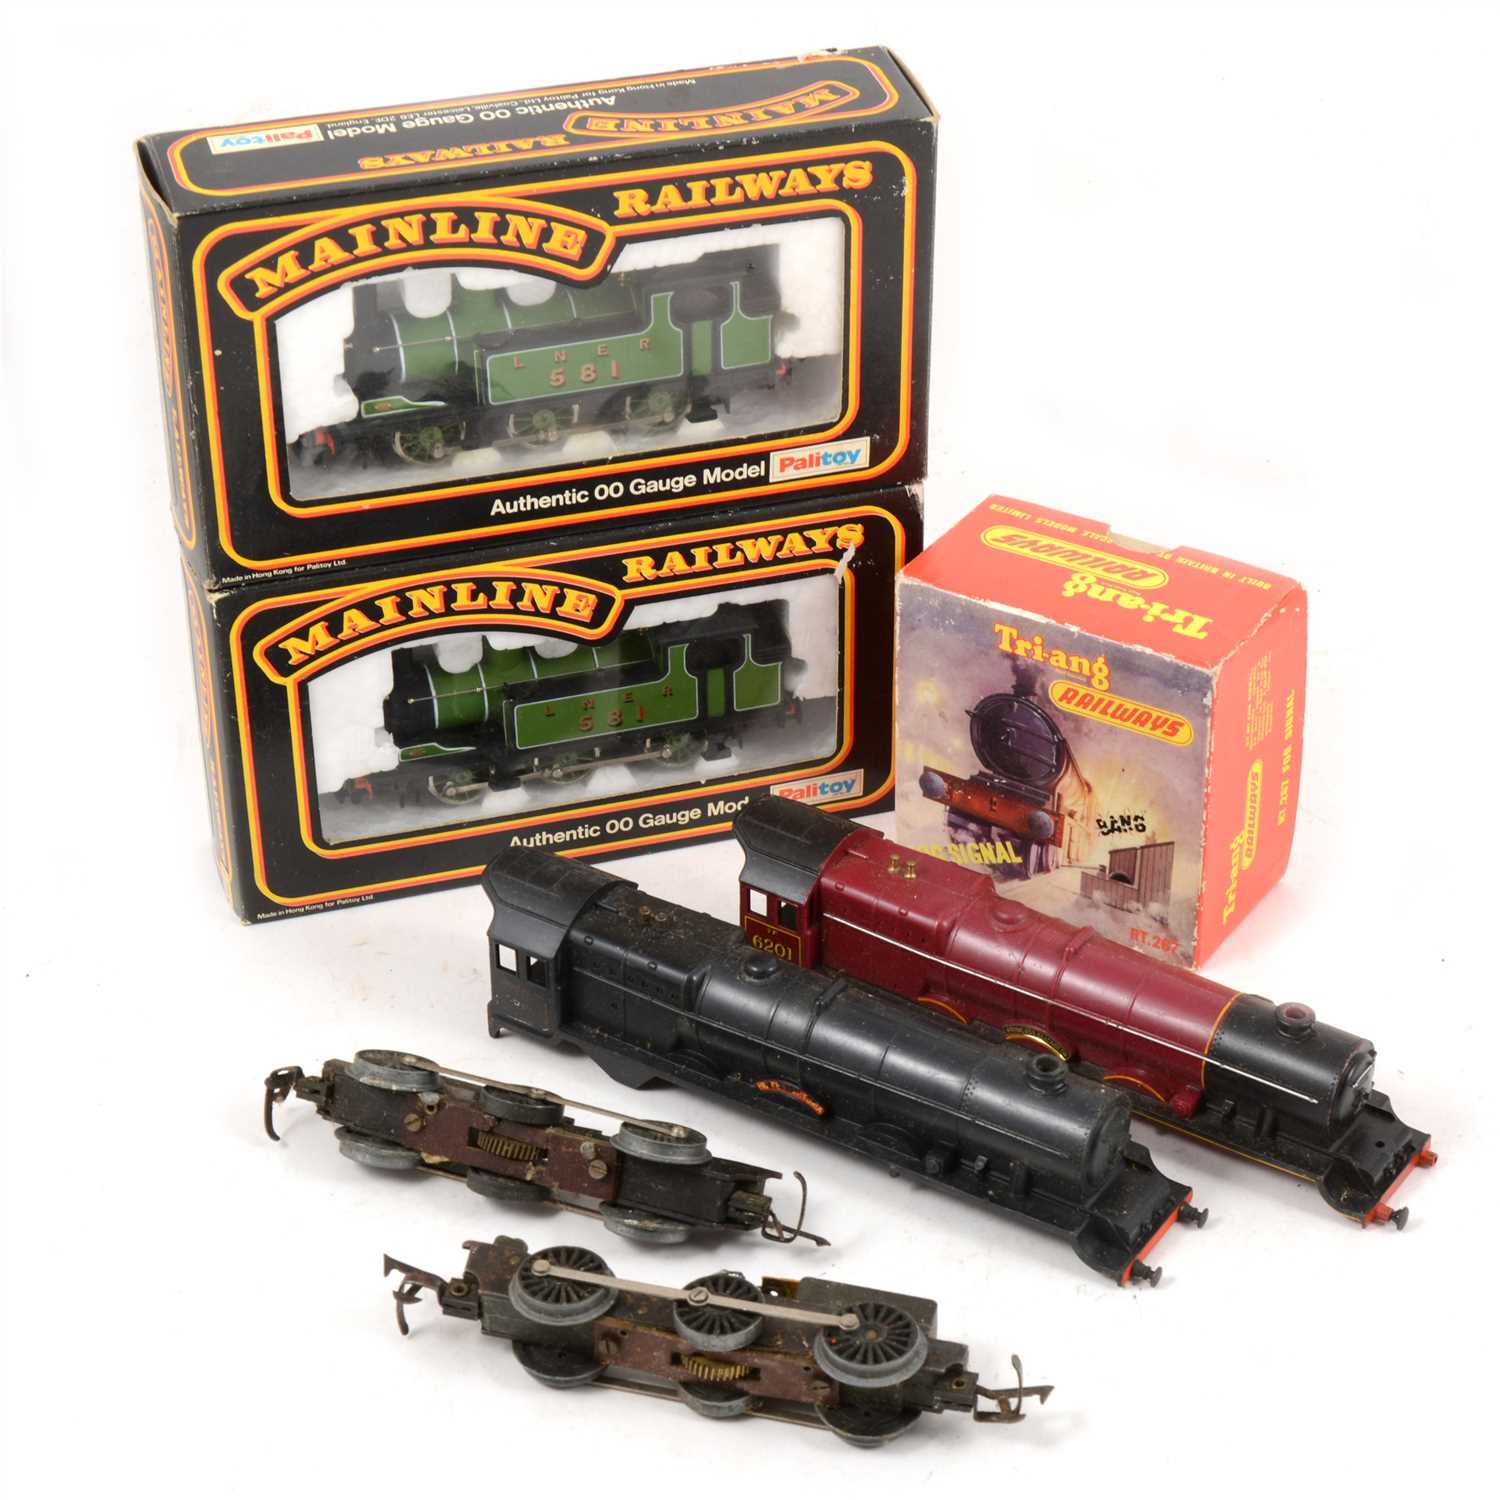 Lot 17 - OO gauge model railways; a collection of locomotives and accessories, one box.